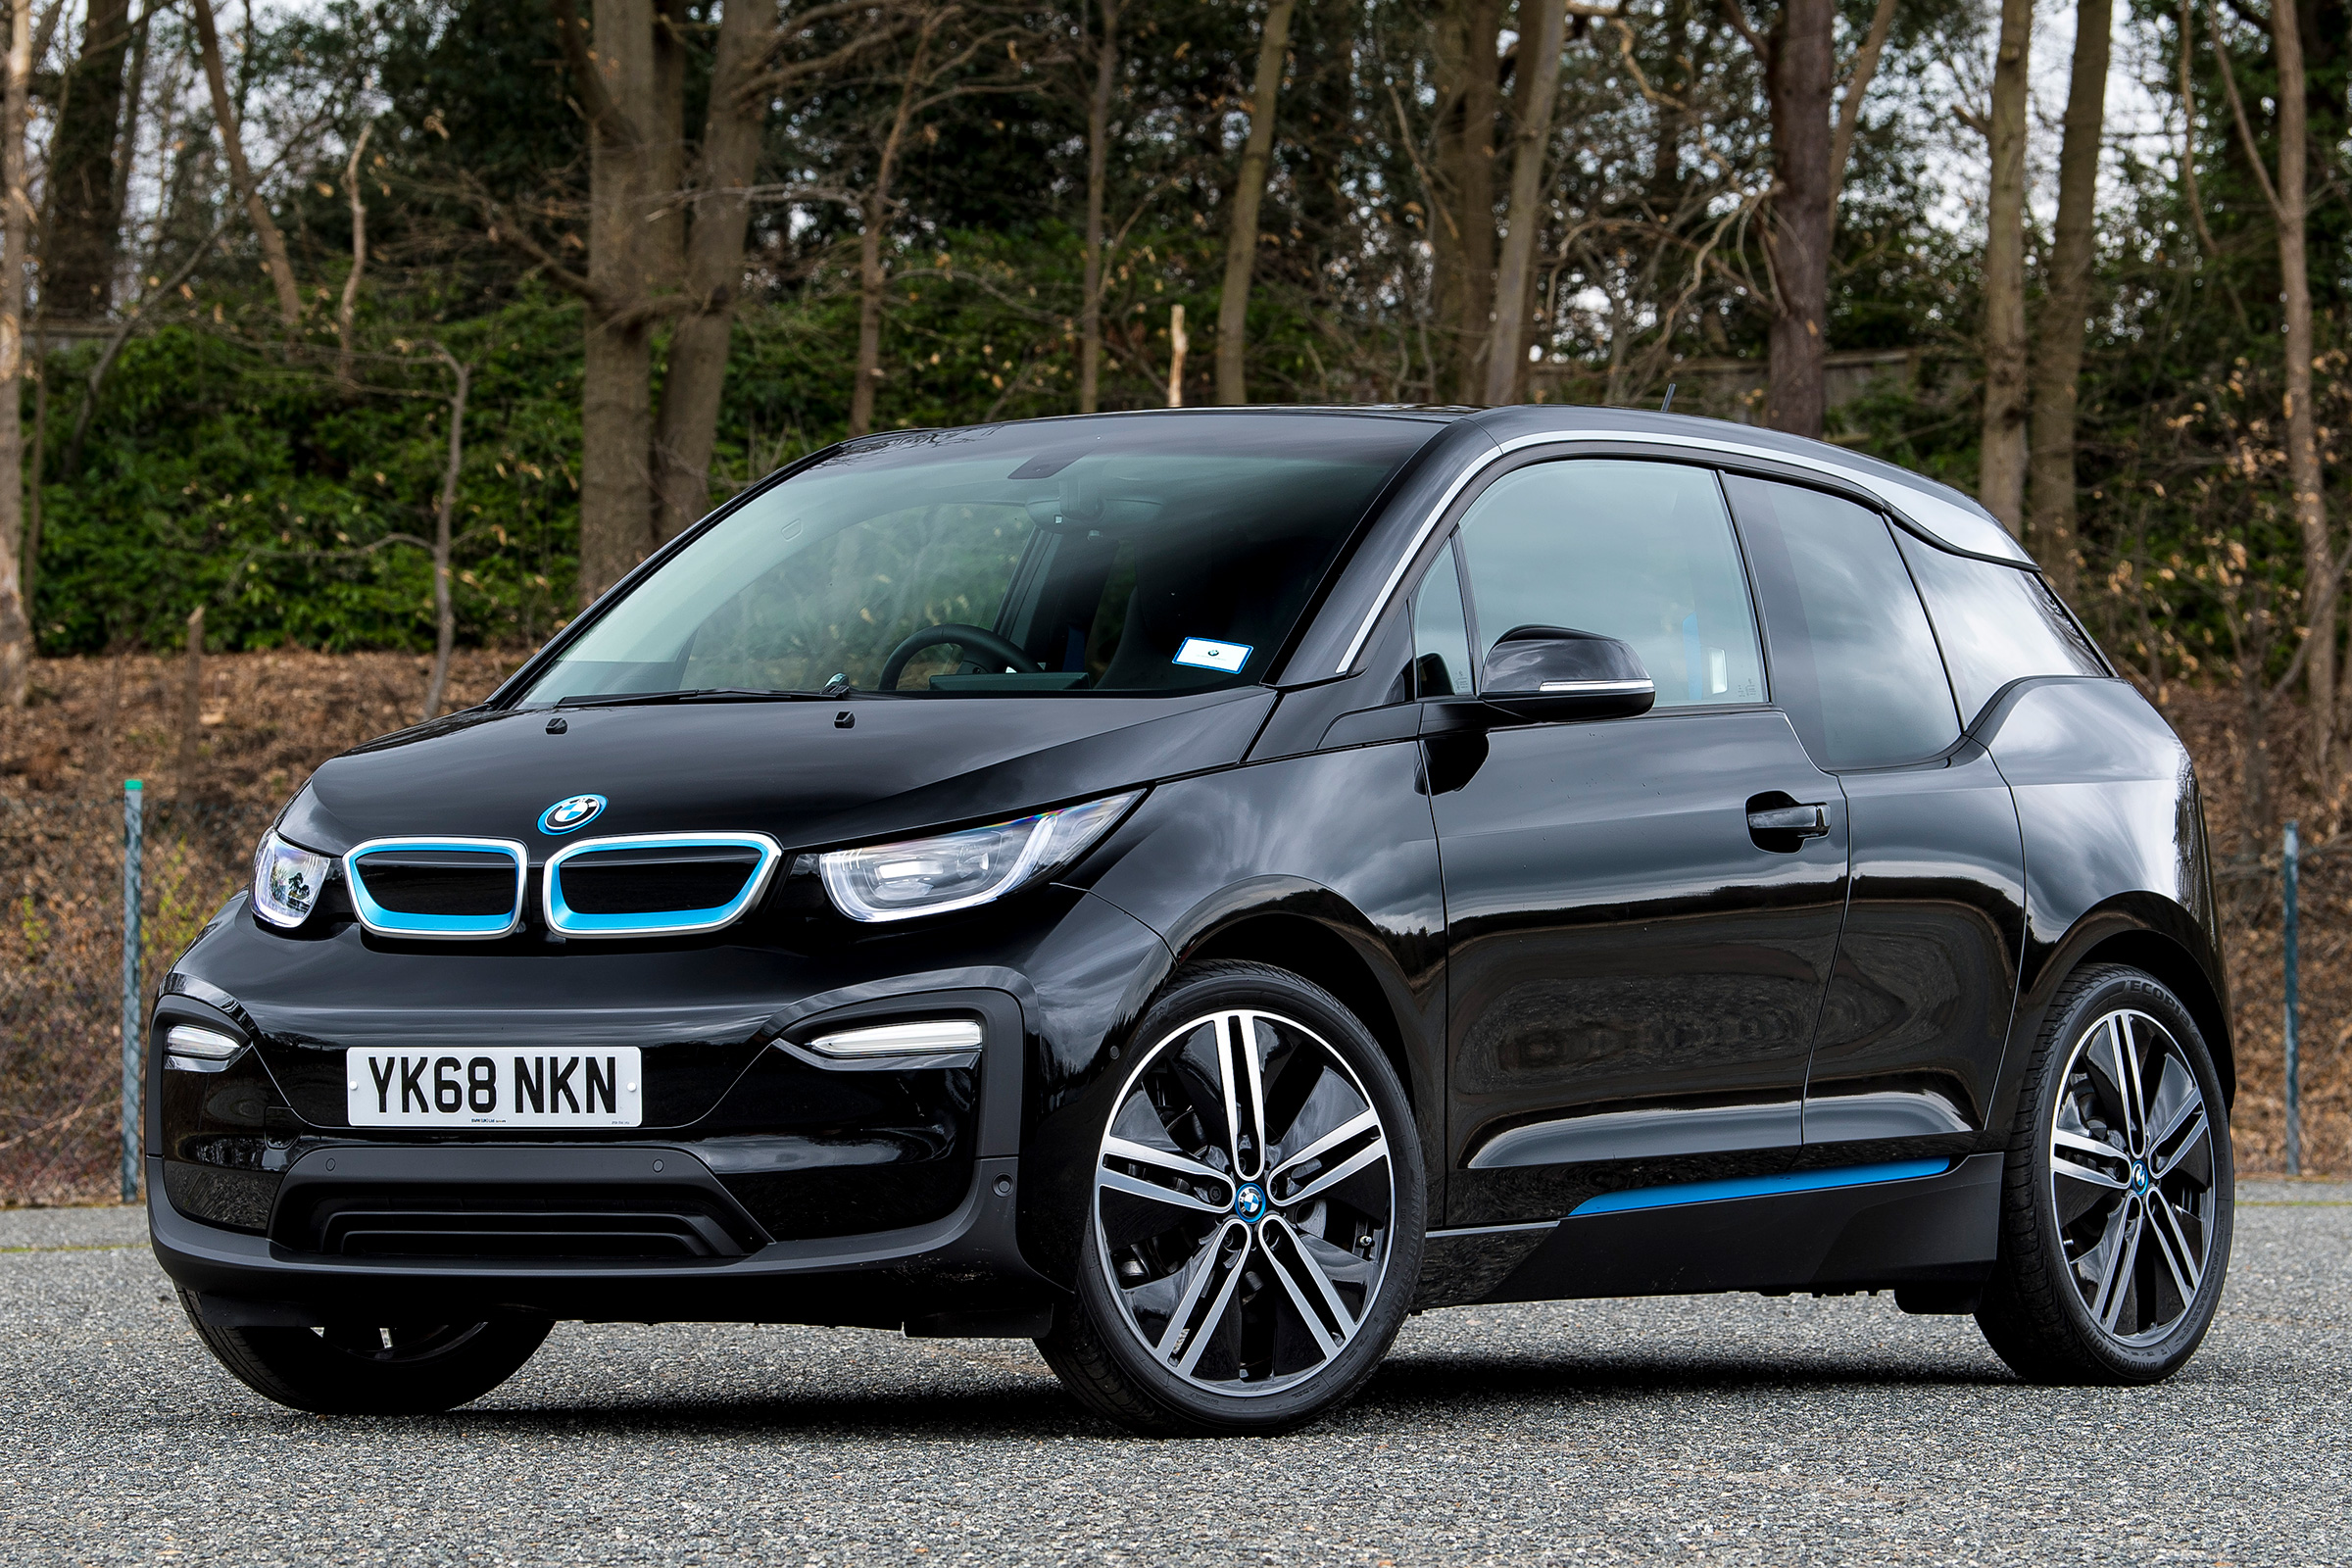 BMW i3 electric car may not be replaced | Auto Express